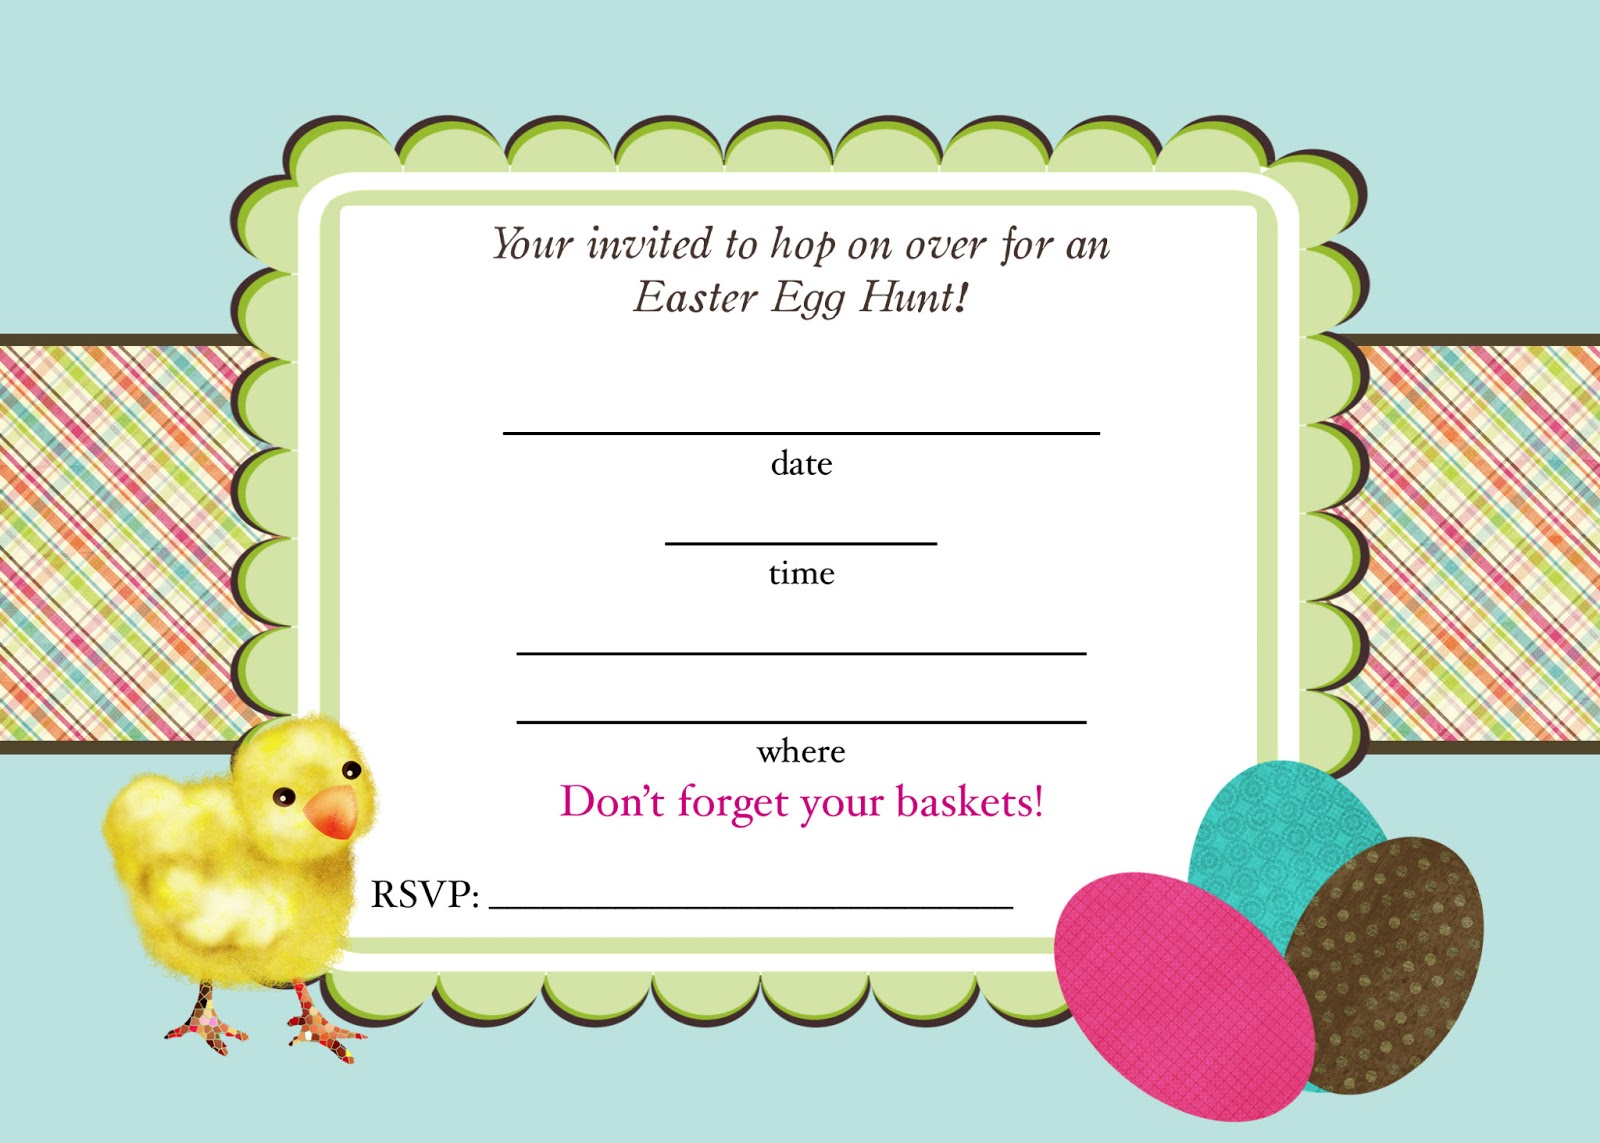 Creatively Quirky at Home: FREE Easter Egg Hunt Printable invitations